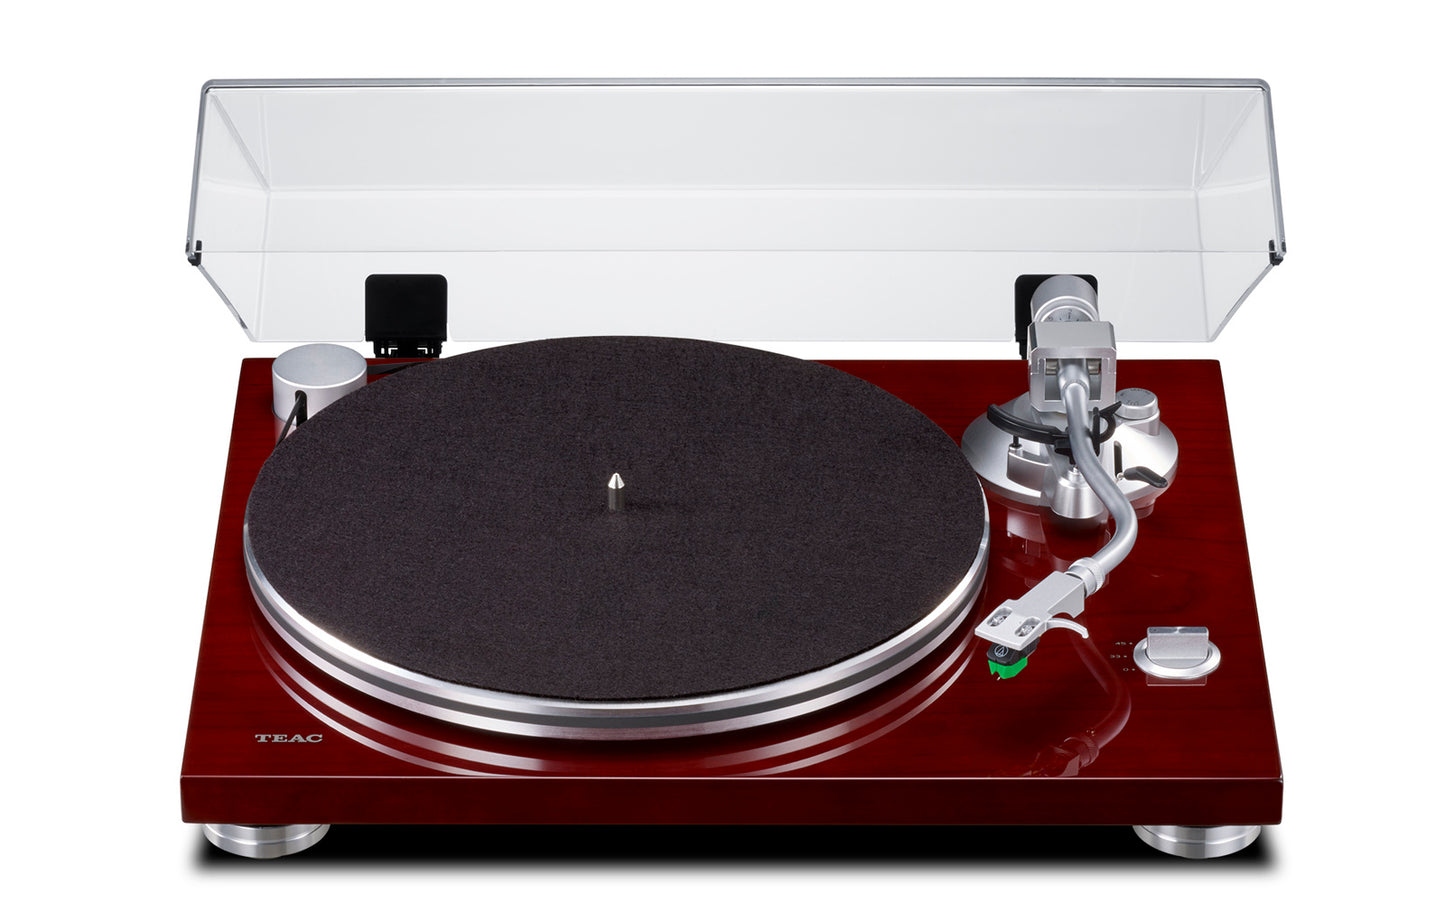 TEAC TN-3B-SE Turntables with Preamplifier